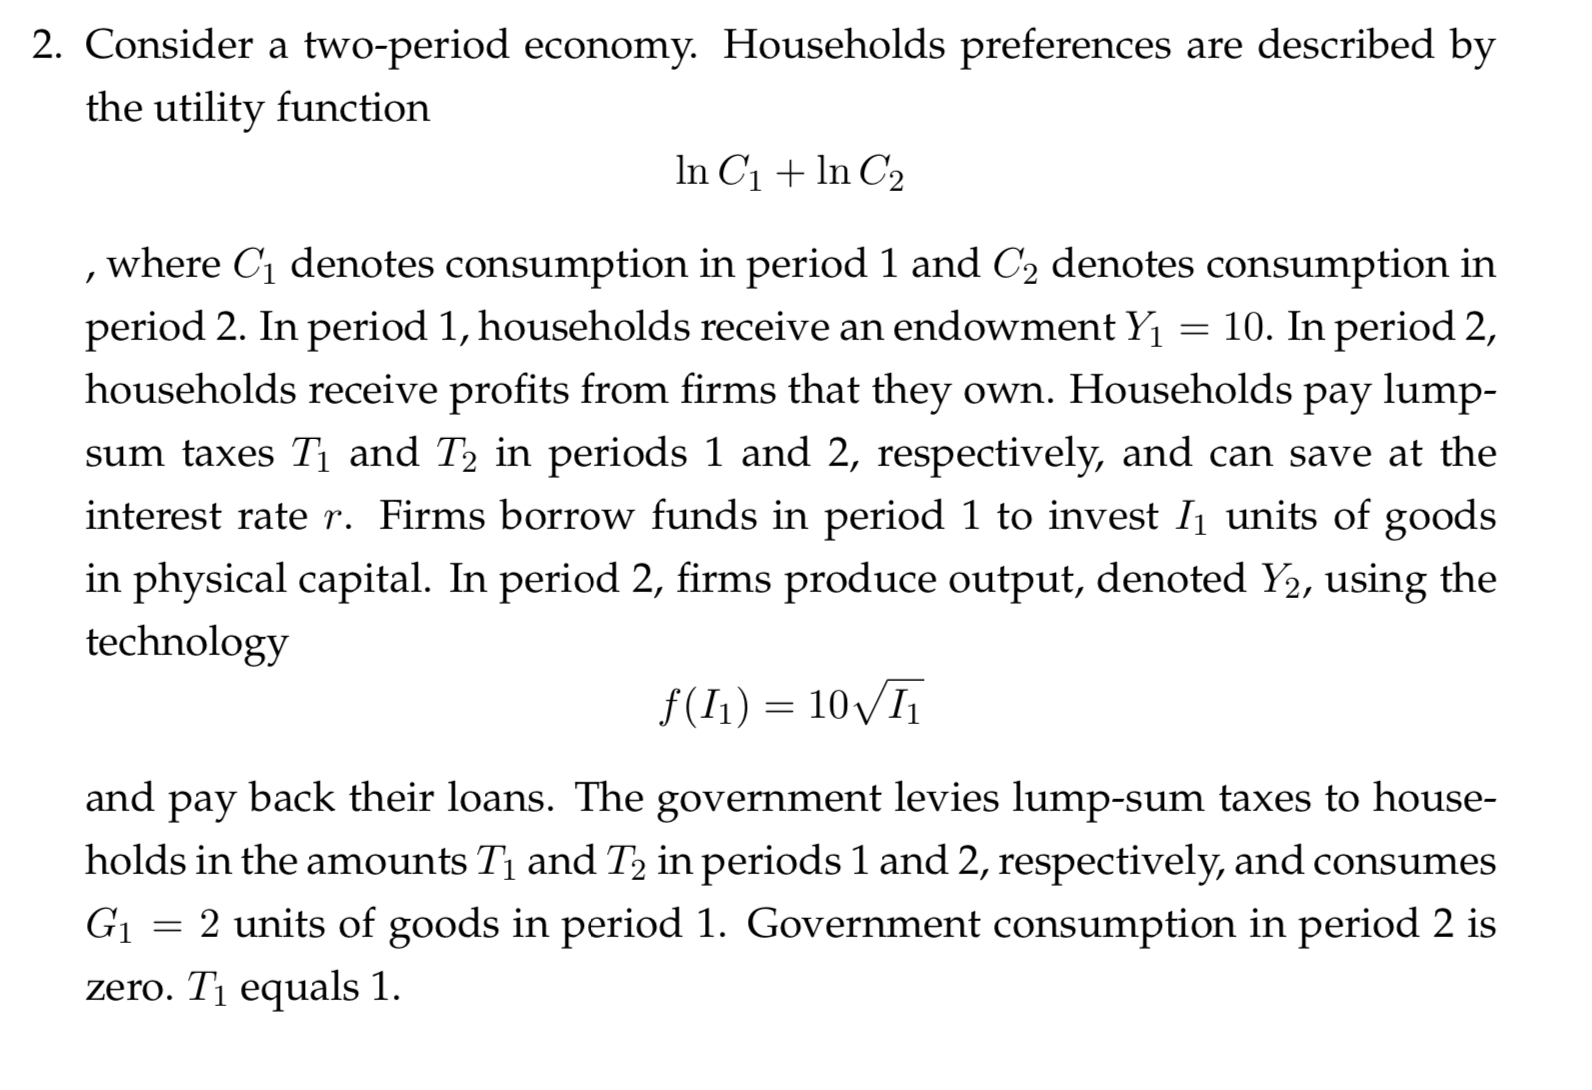 2. Consider a two-period ecornomy. Households preferences are described by
the utility function
In C1n C2
, where C1 denotes consumption in period 1 and C2 denotes consumption in
period 2. In period 1, households receive an endowment Y
households receive profits from firms that they own. Households pay lump-
= 10. In period 2,
sum taxes Ti and T2 in periods 1 and 2, respectively, and can save at the
interest rate r. Firms borrow funds in period 1 to invest I1 units of goods
in physical capital. In period 2, firms produce output, denoted Y2, using the
technology
f(I1) 10I
and
back their loans. The government levies lump-sum taxes to house-
рay
holds in the amounts Ti and T2 in periods 1 and 2, respectively, and consumes
G
2 units of goods in period 1. Government consumption in period 2 is
zero. T1 equals 1.
